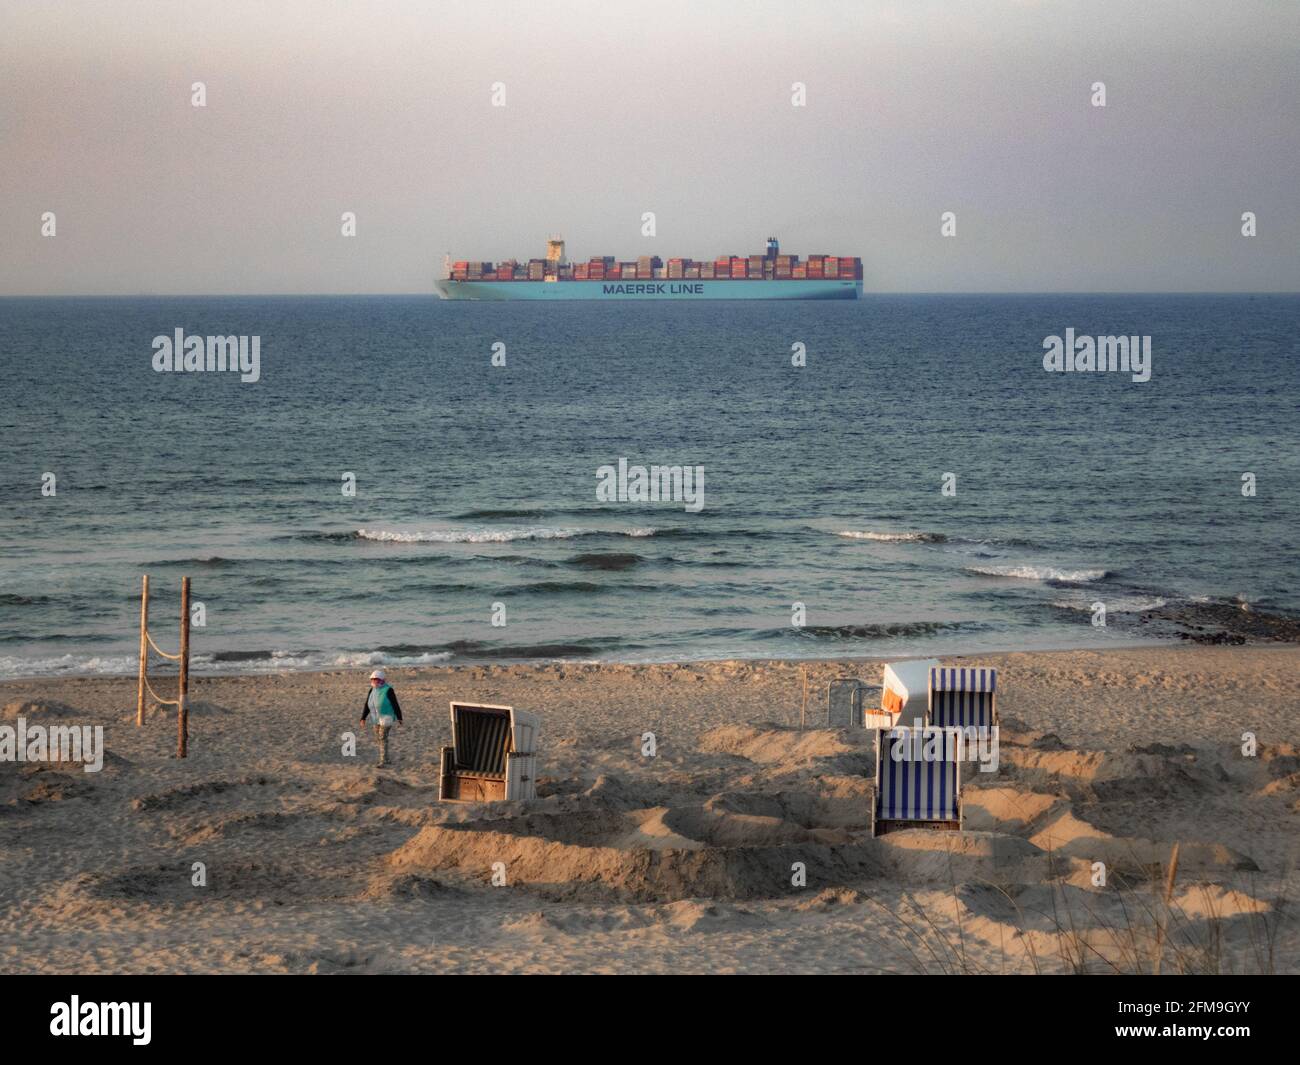 View of the Maersk Line container ship in front of Wangerooge Stock Photo